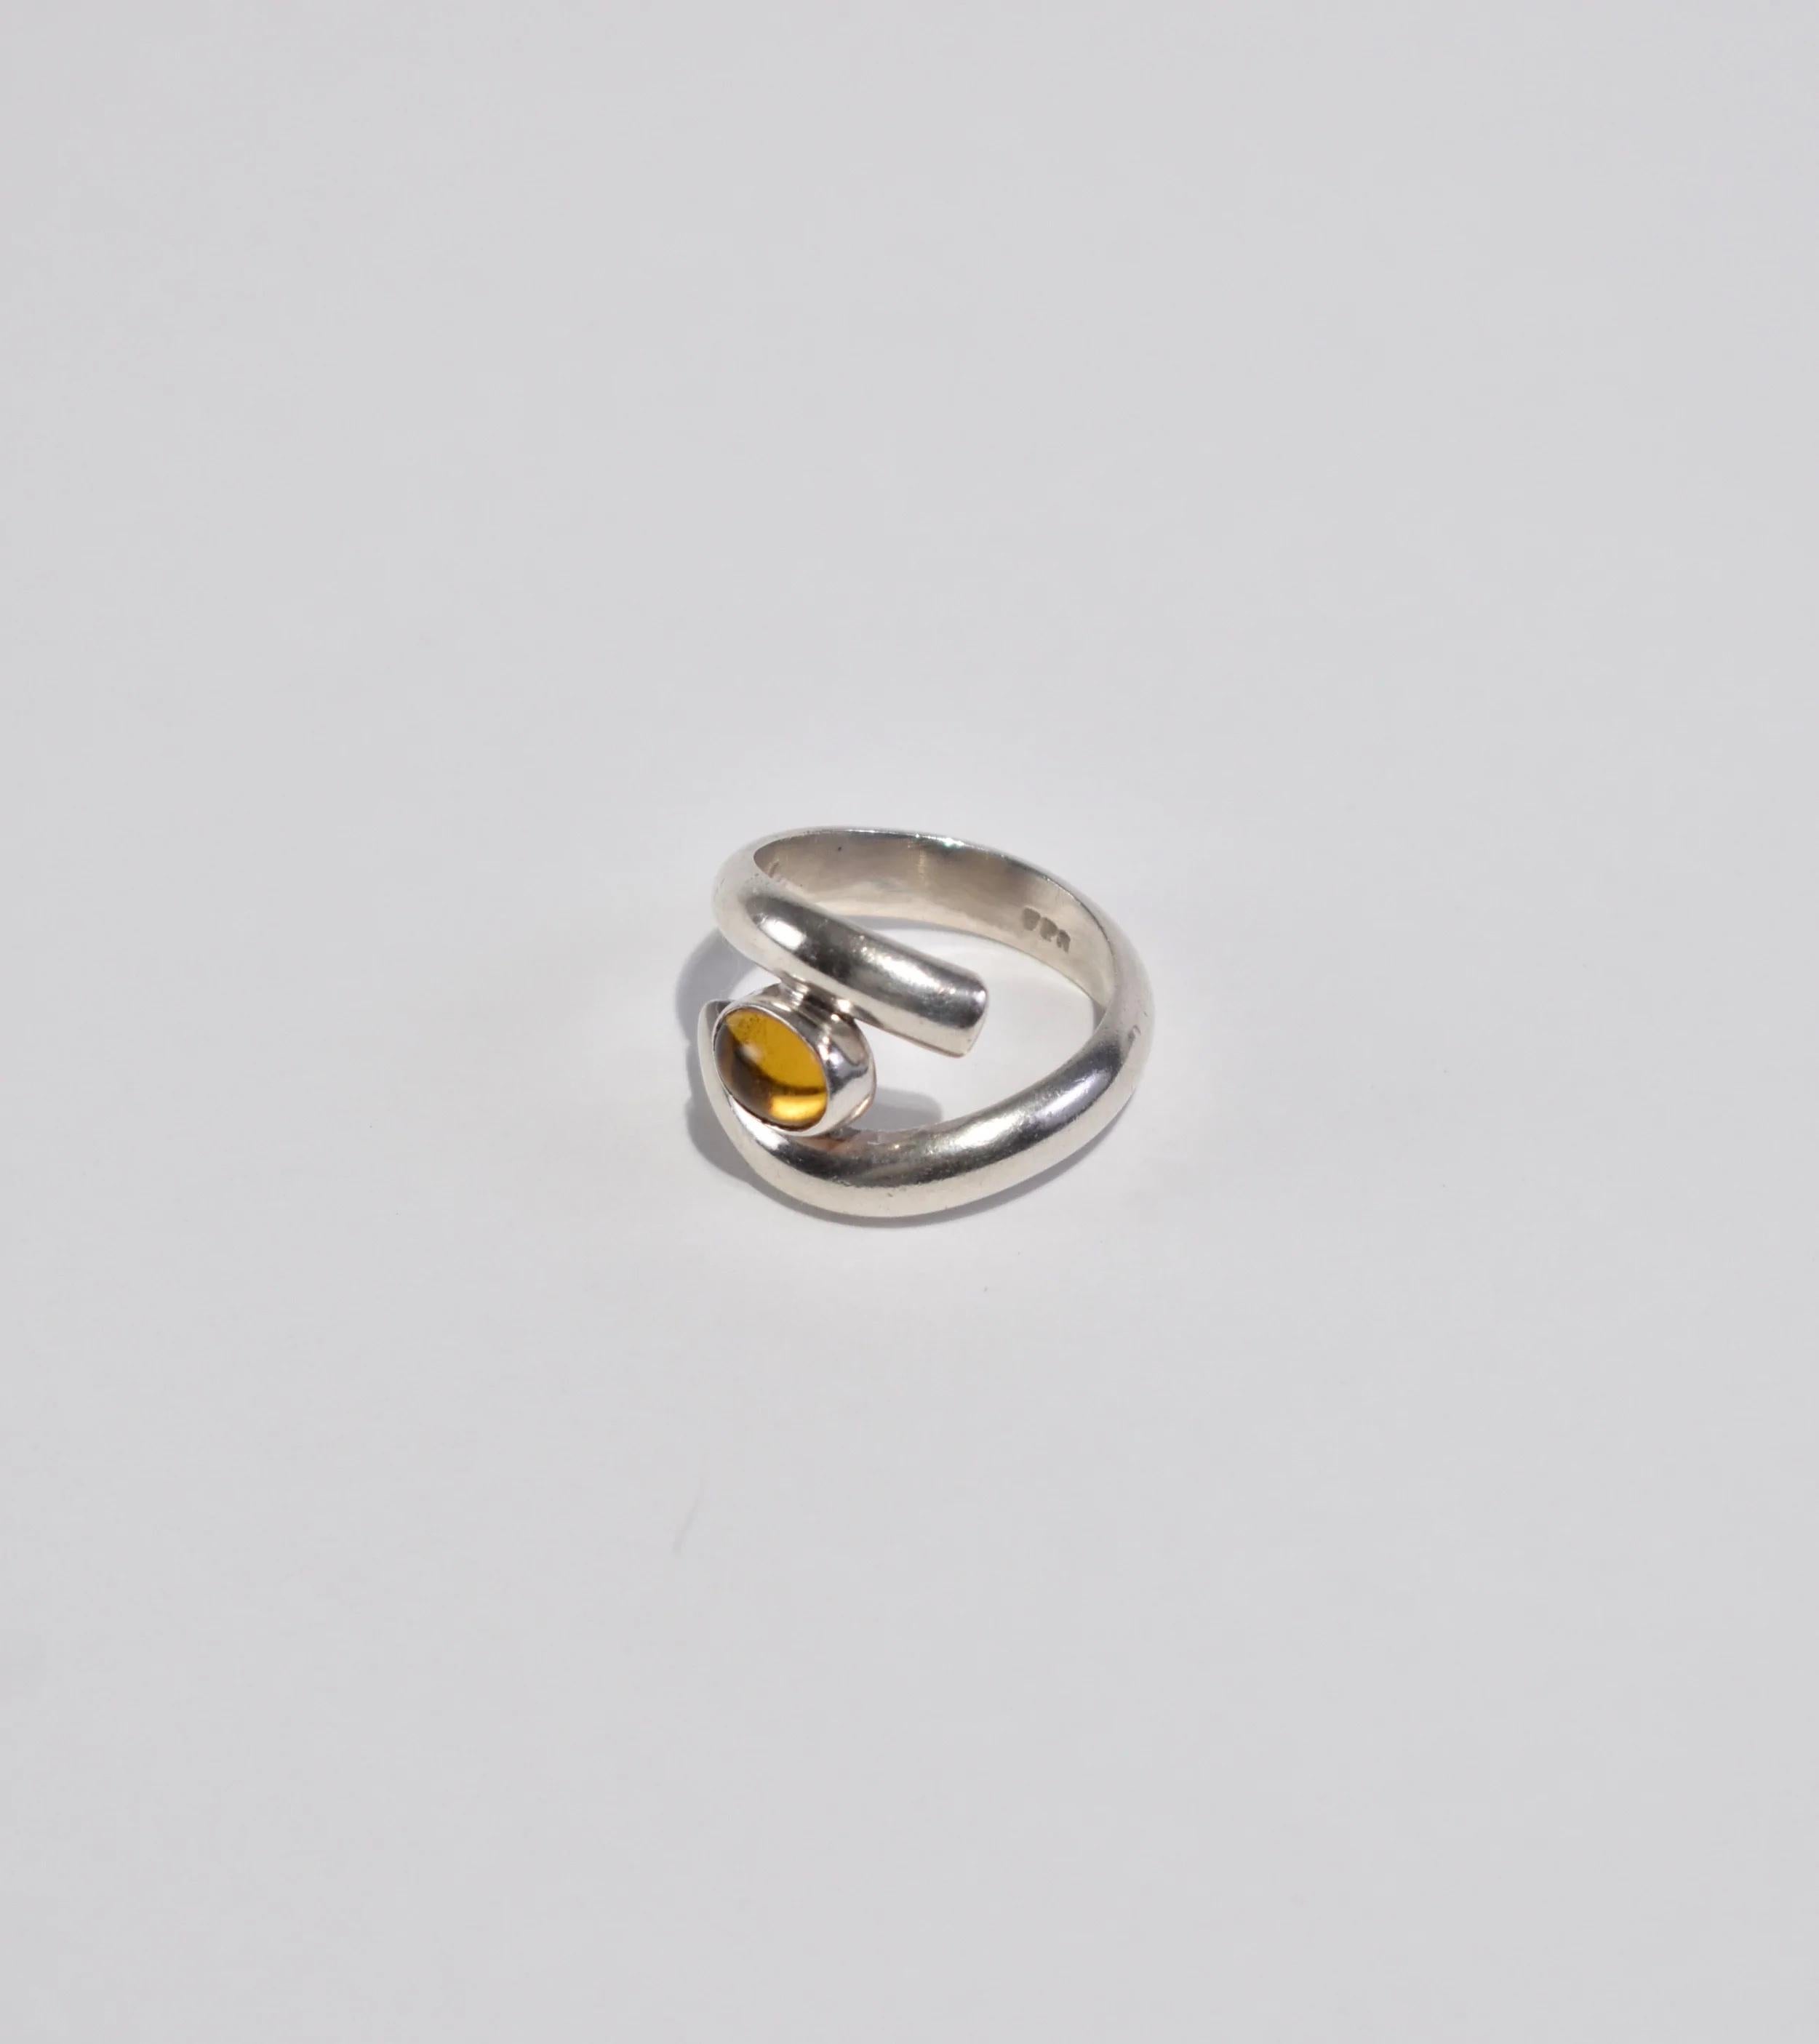 Stunning vintage sterling ring with wrap design and citrine cabochon detail. Stamped 925.

Material: Sterling silver, citrine.